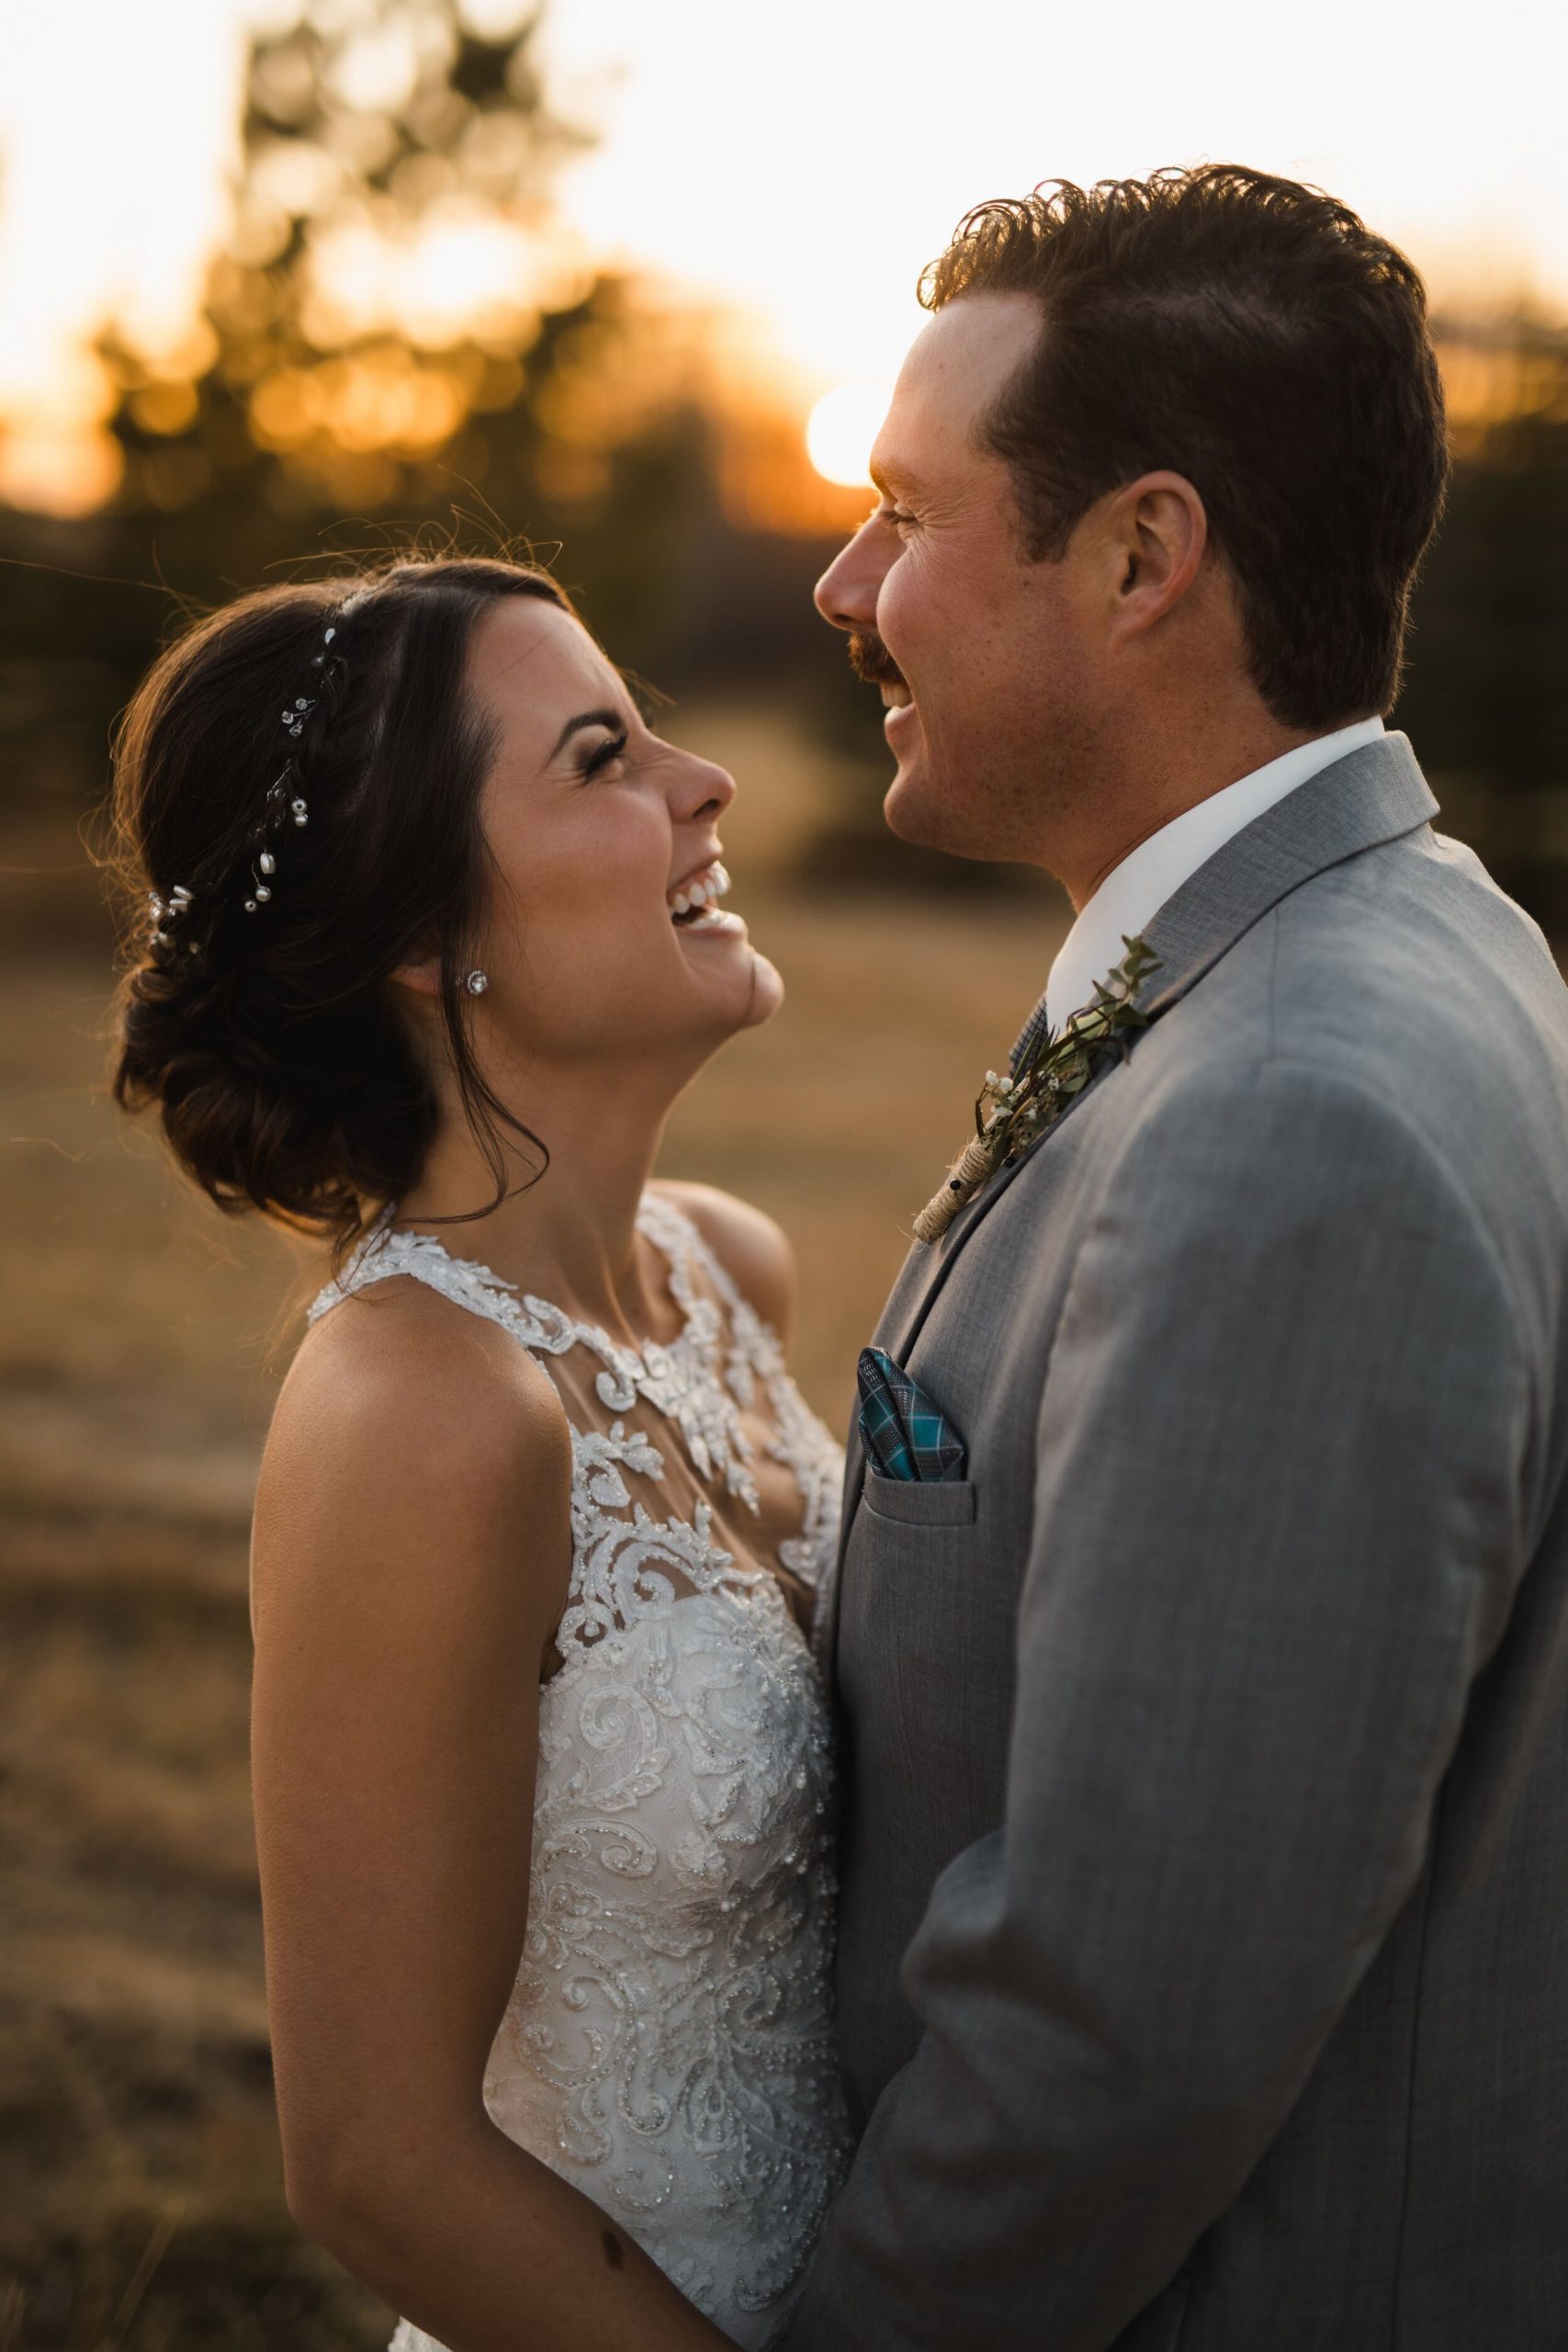 Sunset on wedding day, bride is wearing lace dress and laughs as she gazes at her husband lovingly.